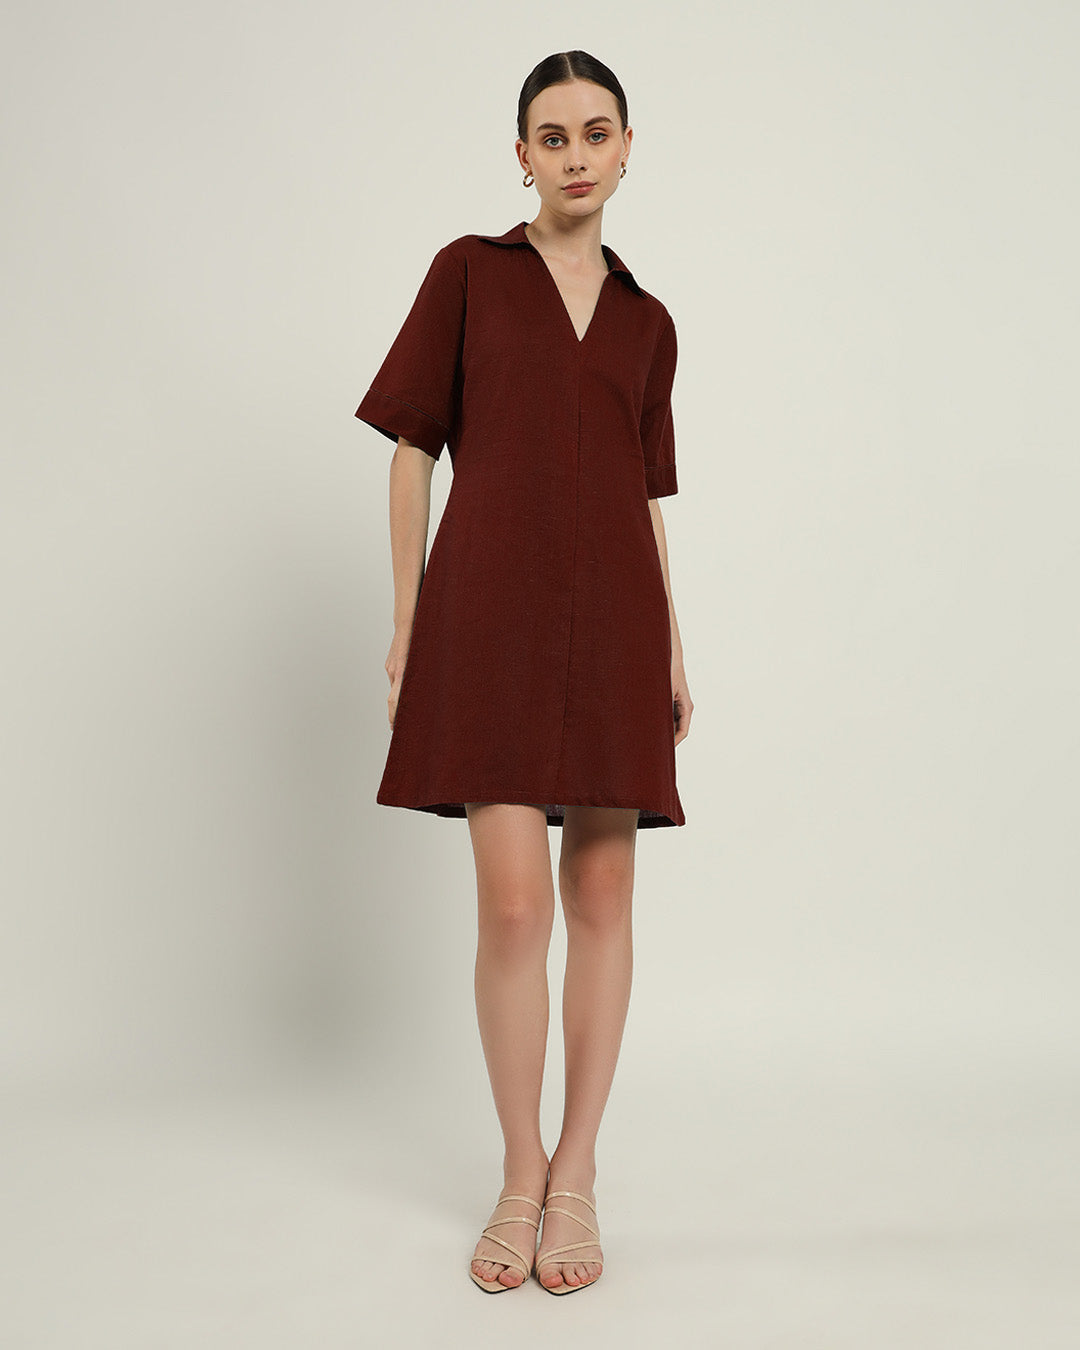 The Ermont Rouge Dress